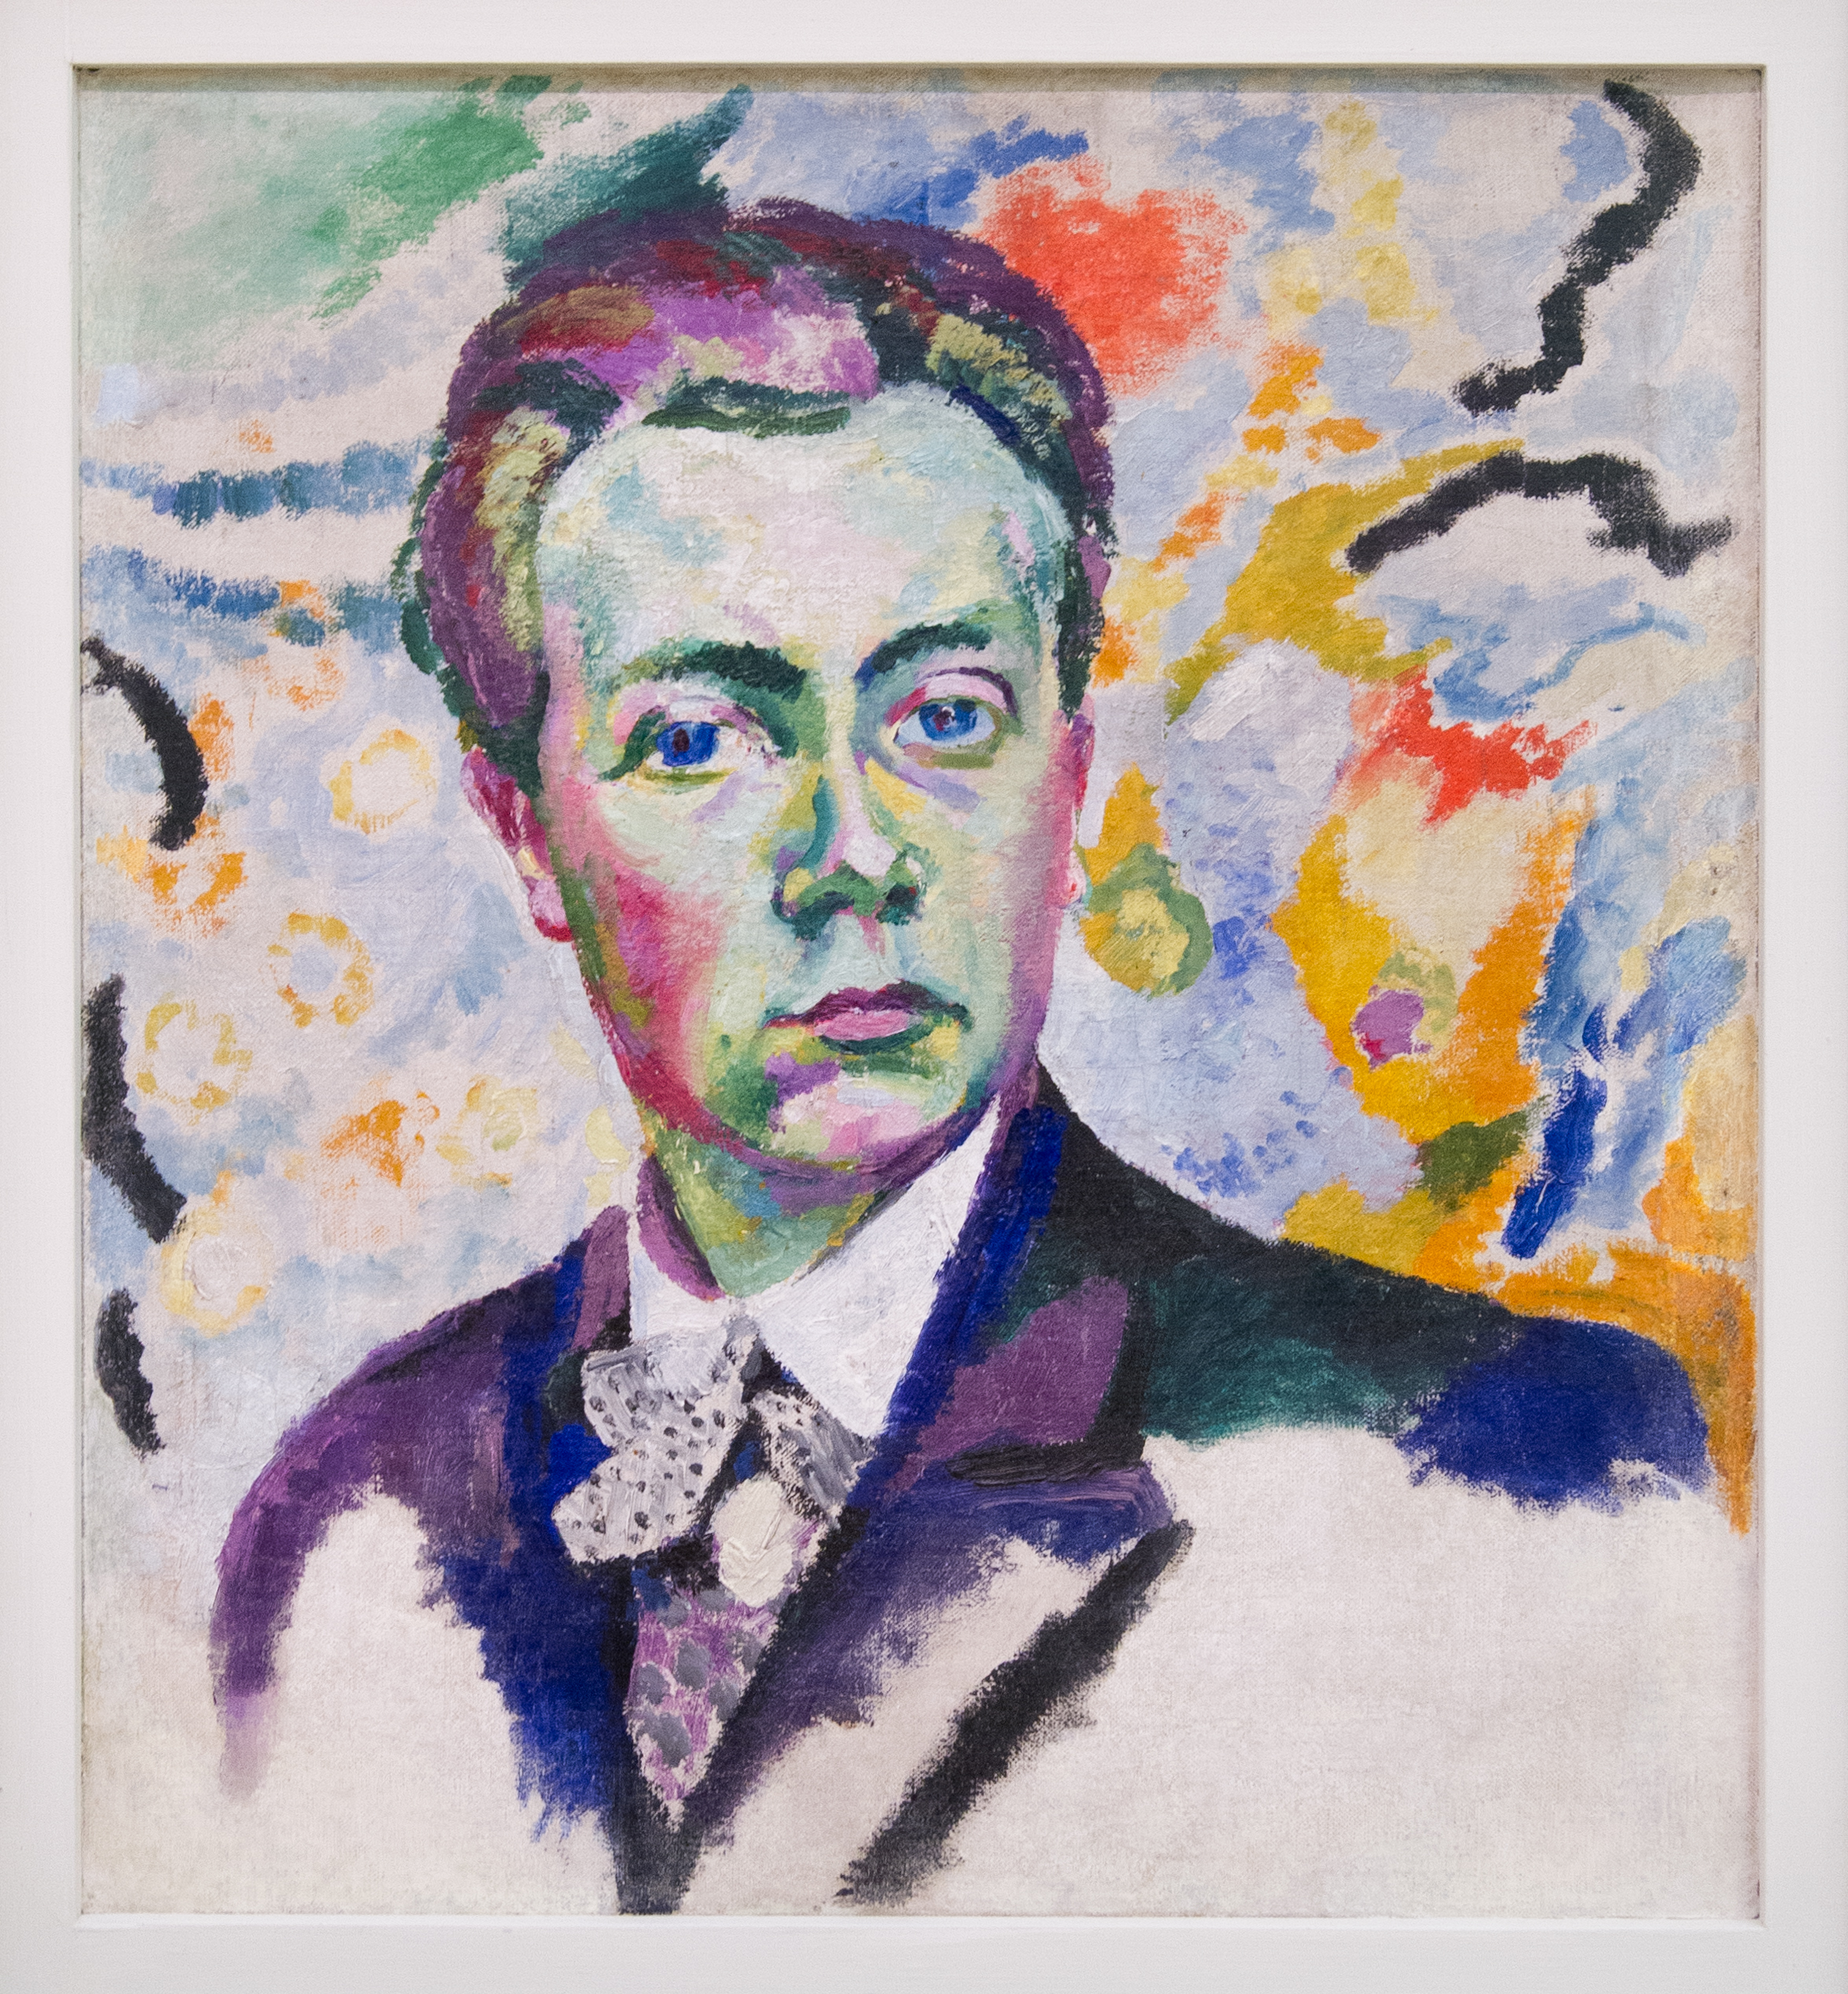 Guillaume Delaunay